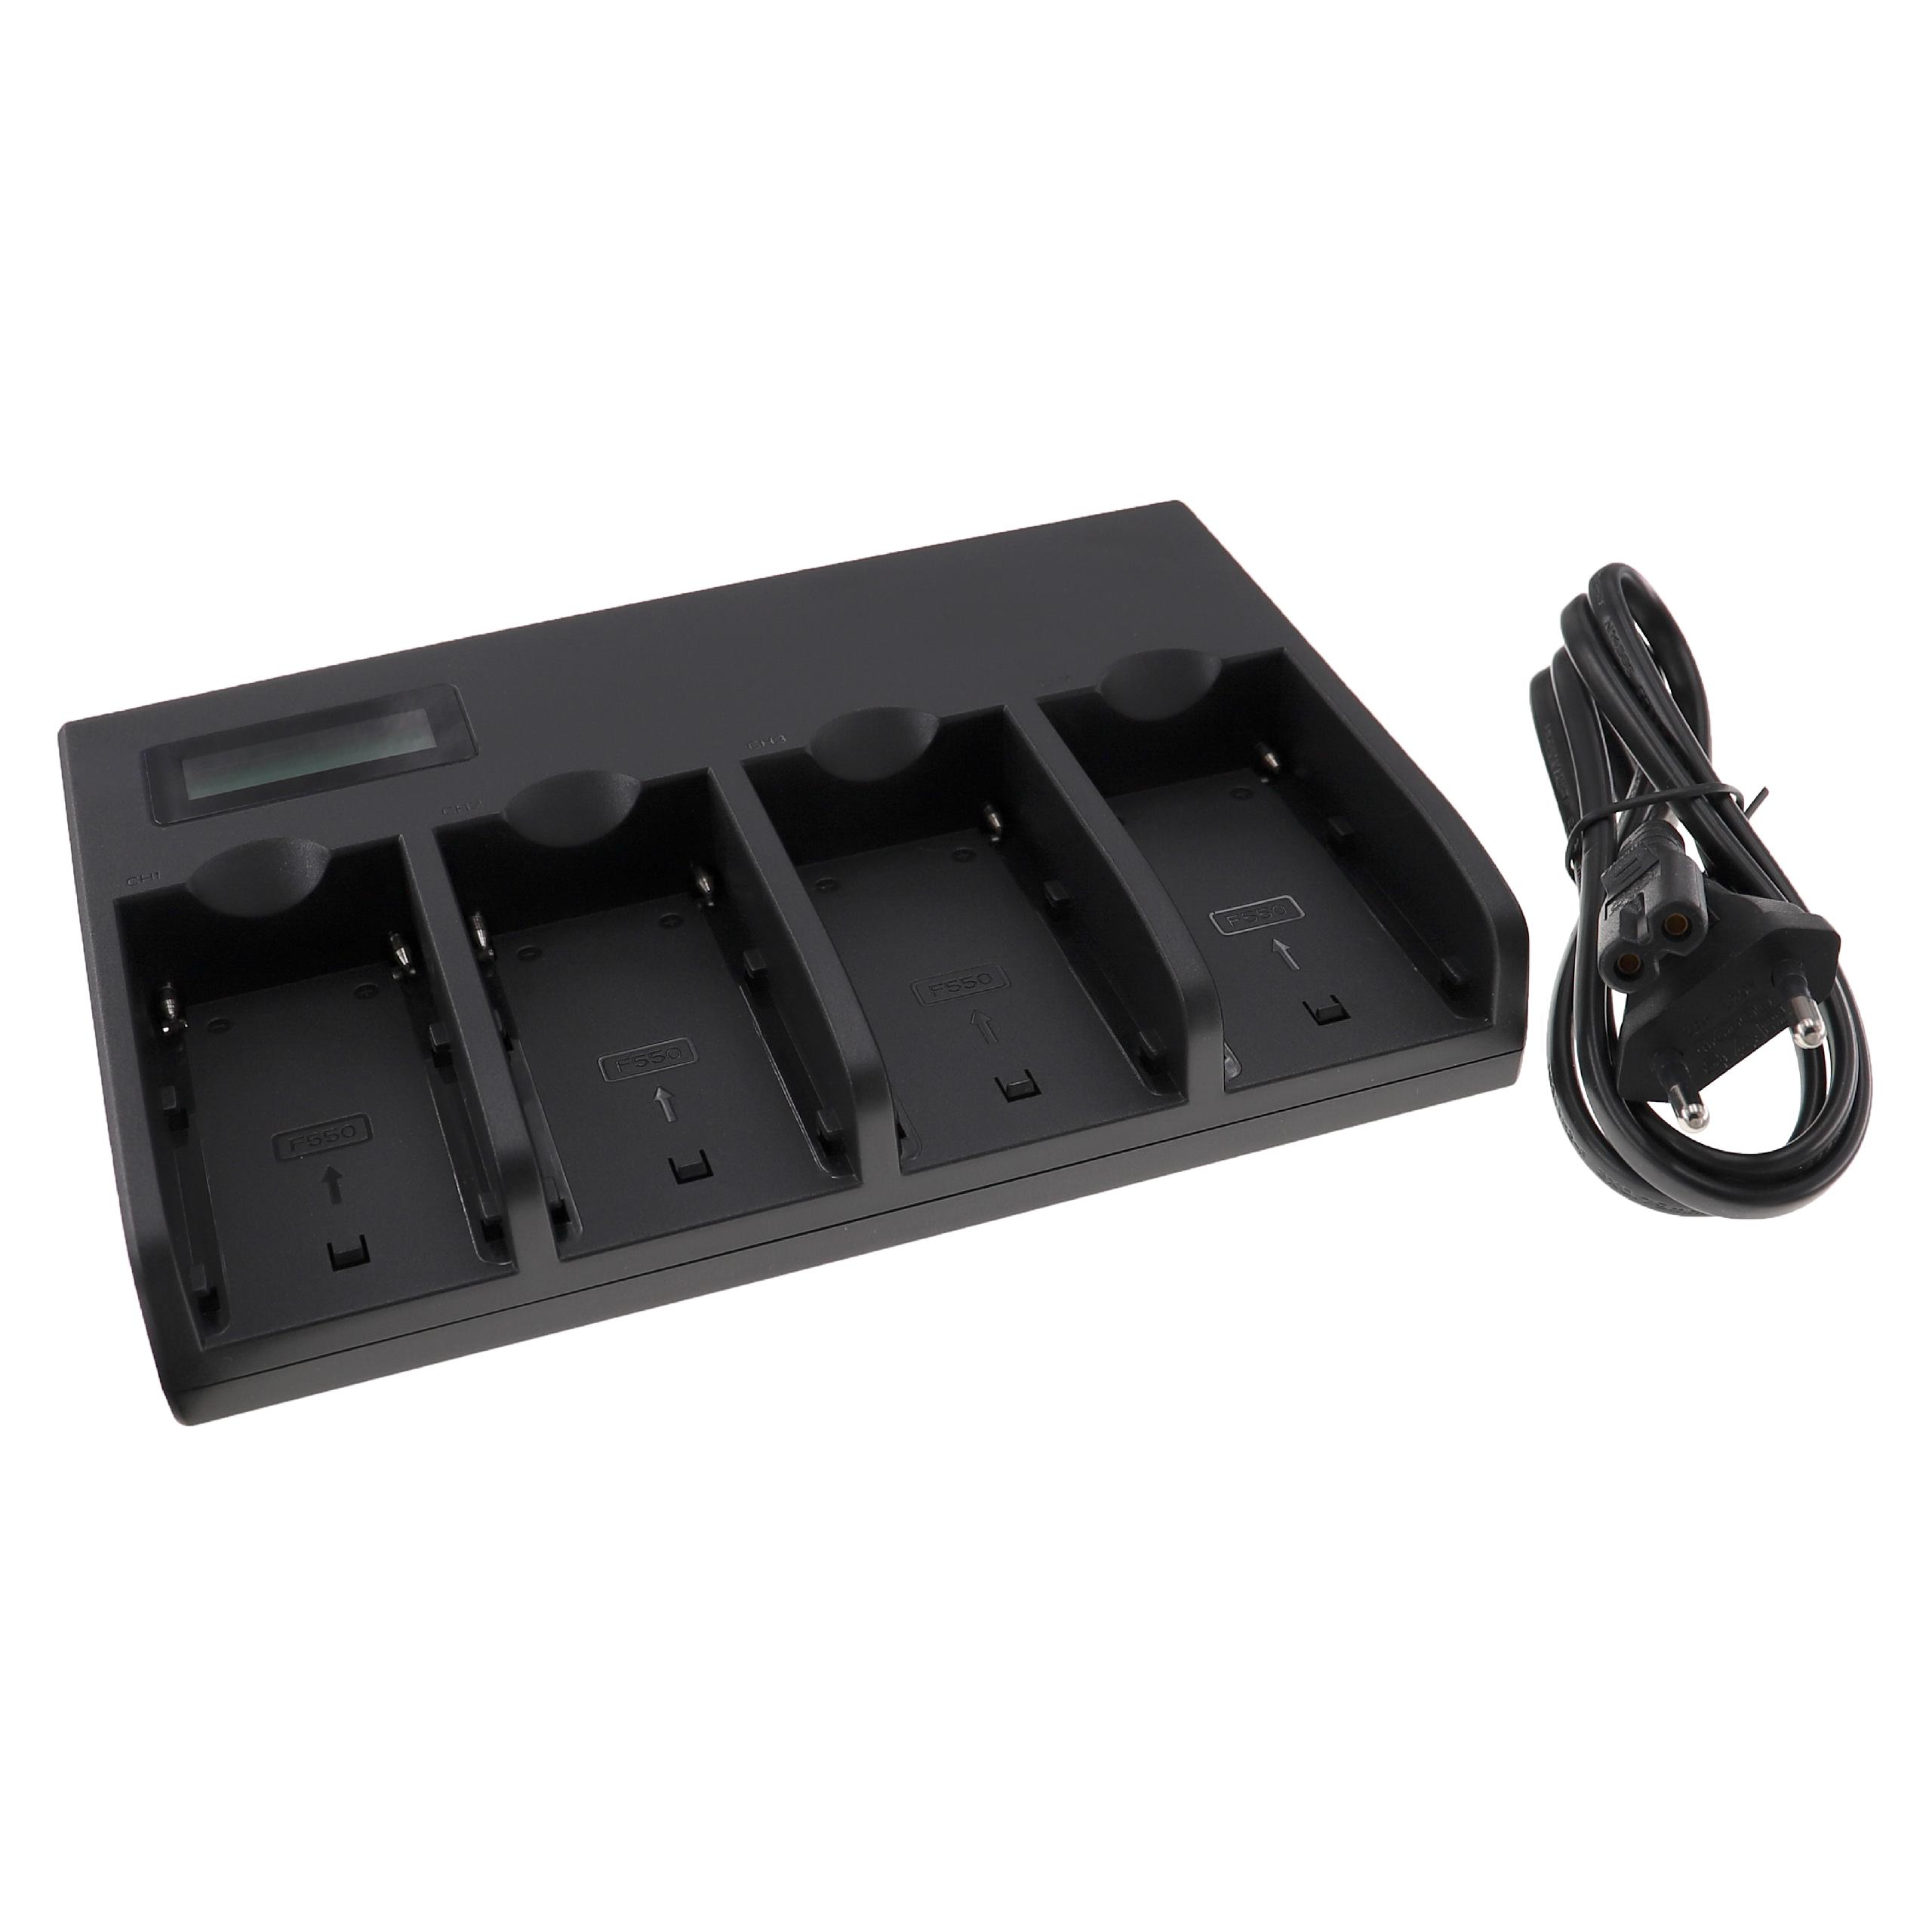 Battery Charger suitable for Sony NP-F960 Camera etc. - 1.0 A, 8.4 V